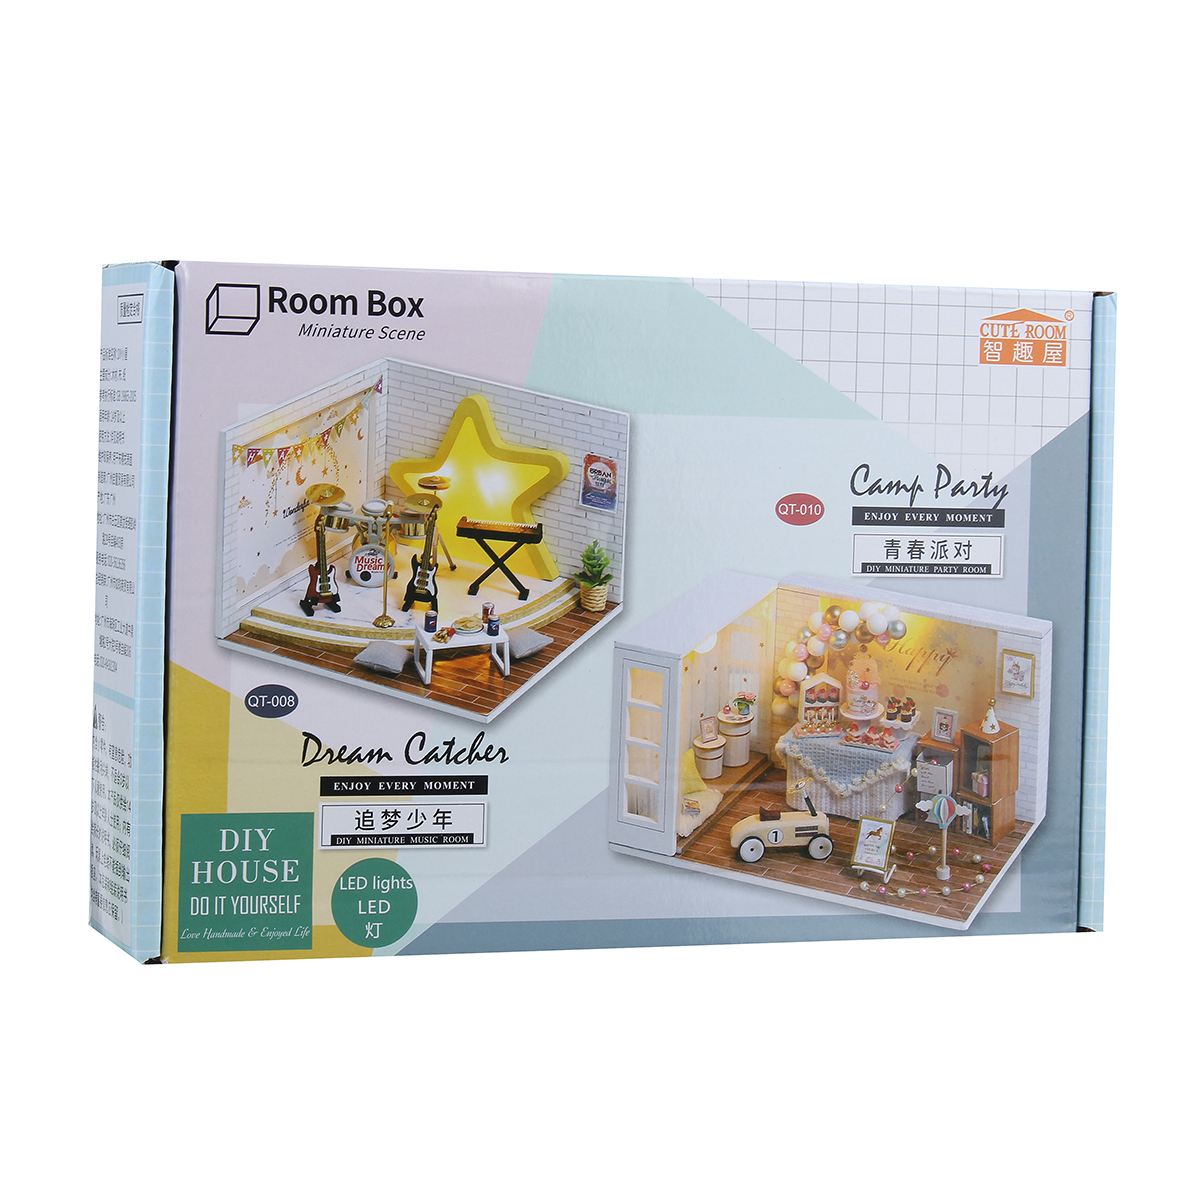 132-Wooden-DIY-Doll-House-Miniature-Kits-Handmade-Assemble-Toy-with-Furniture-LED-Light-for-Gift-Col-1817559-10